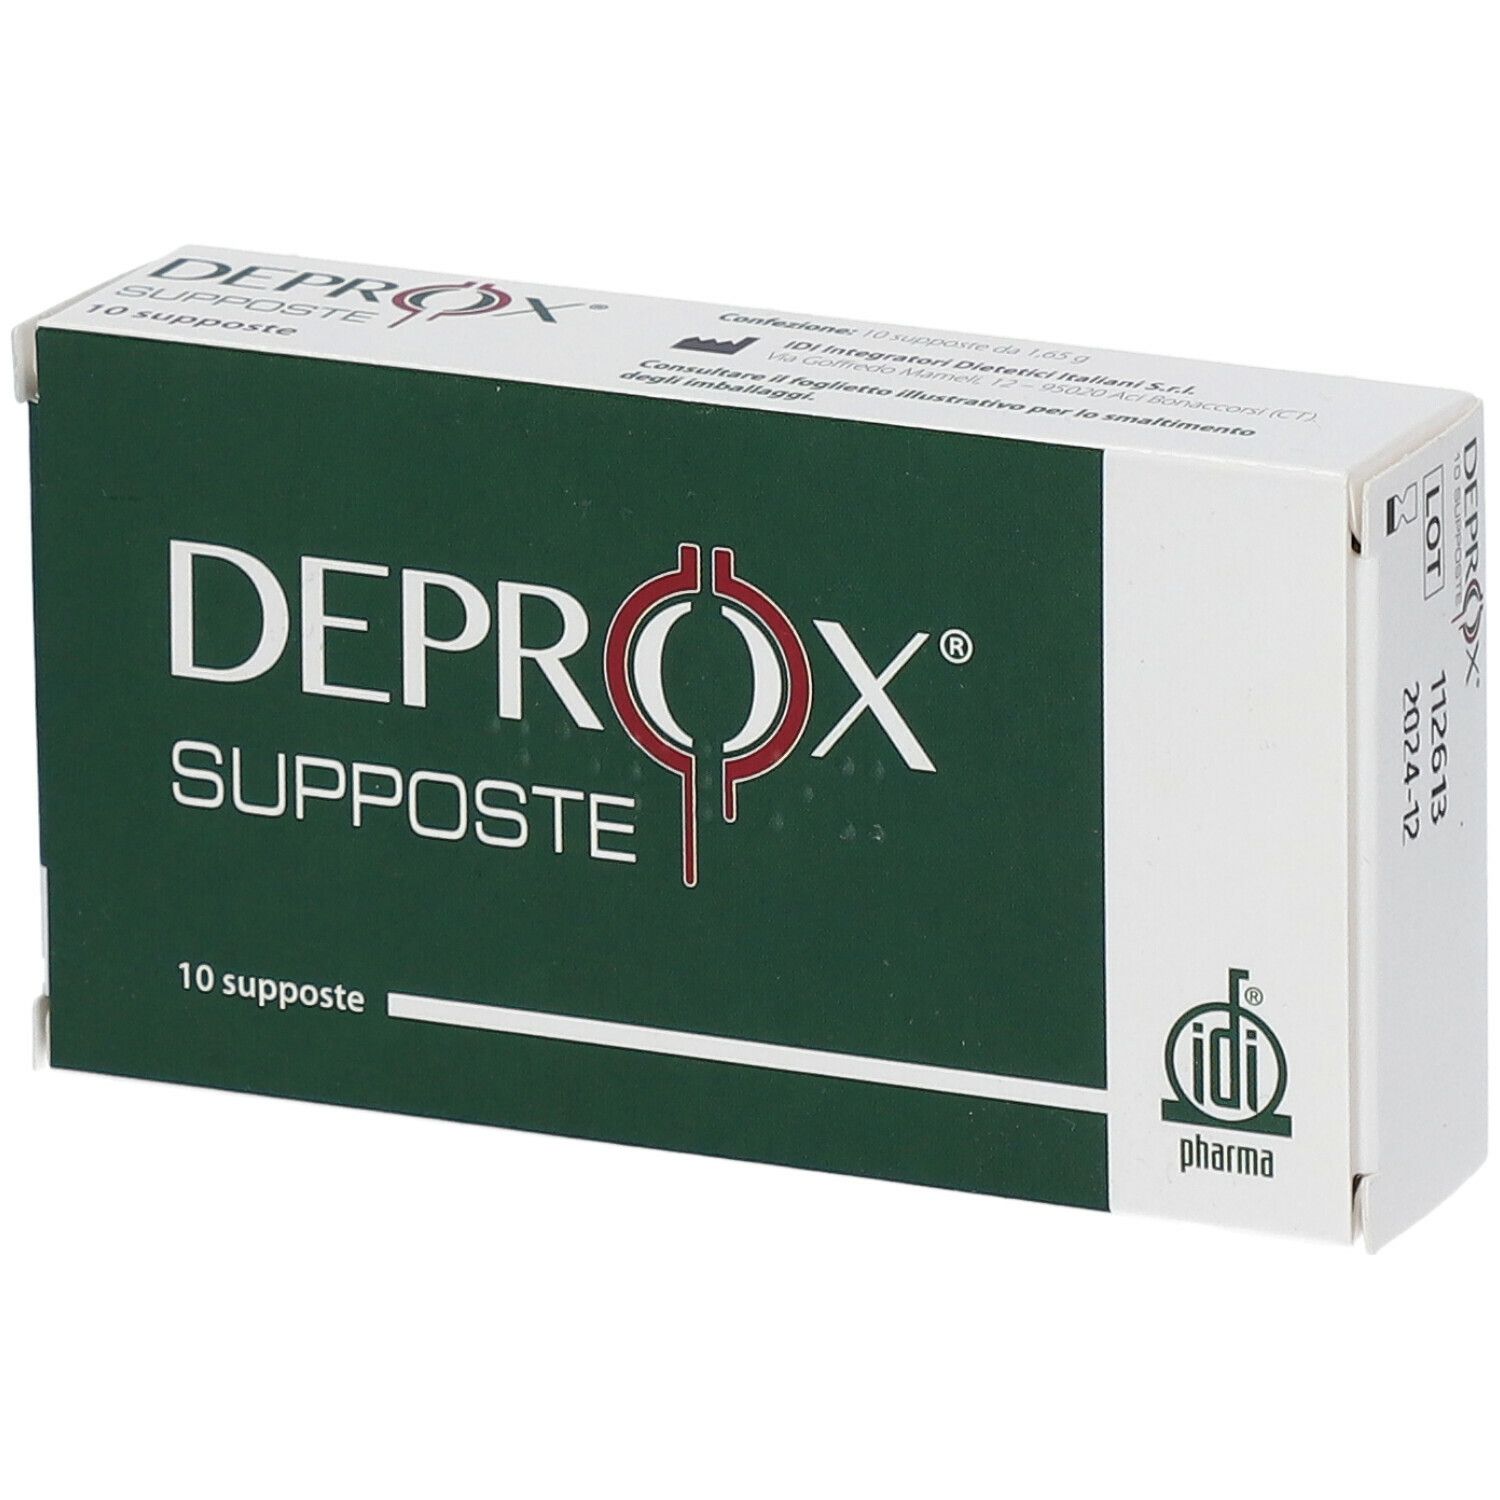 Image of DEPROX® Supposte